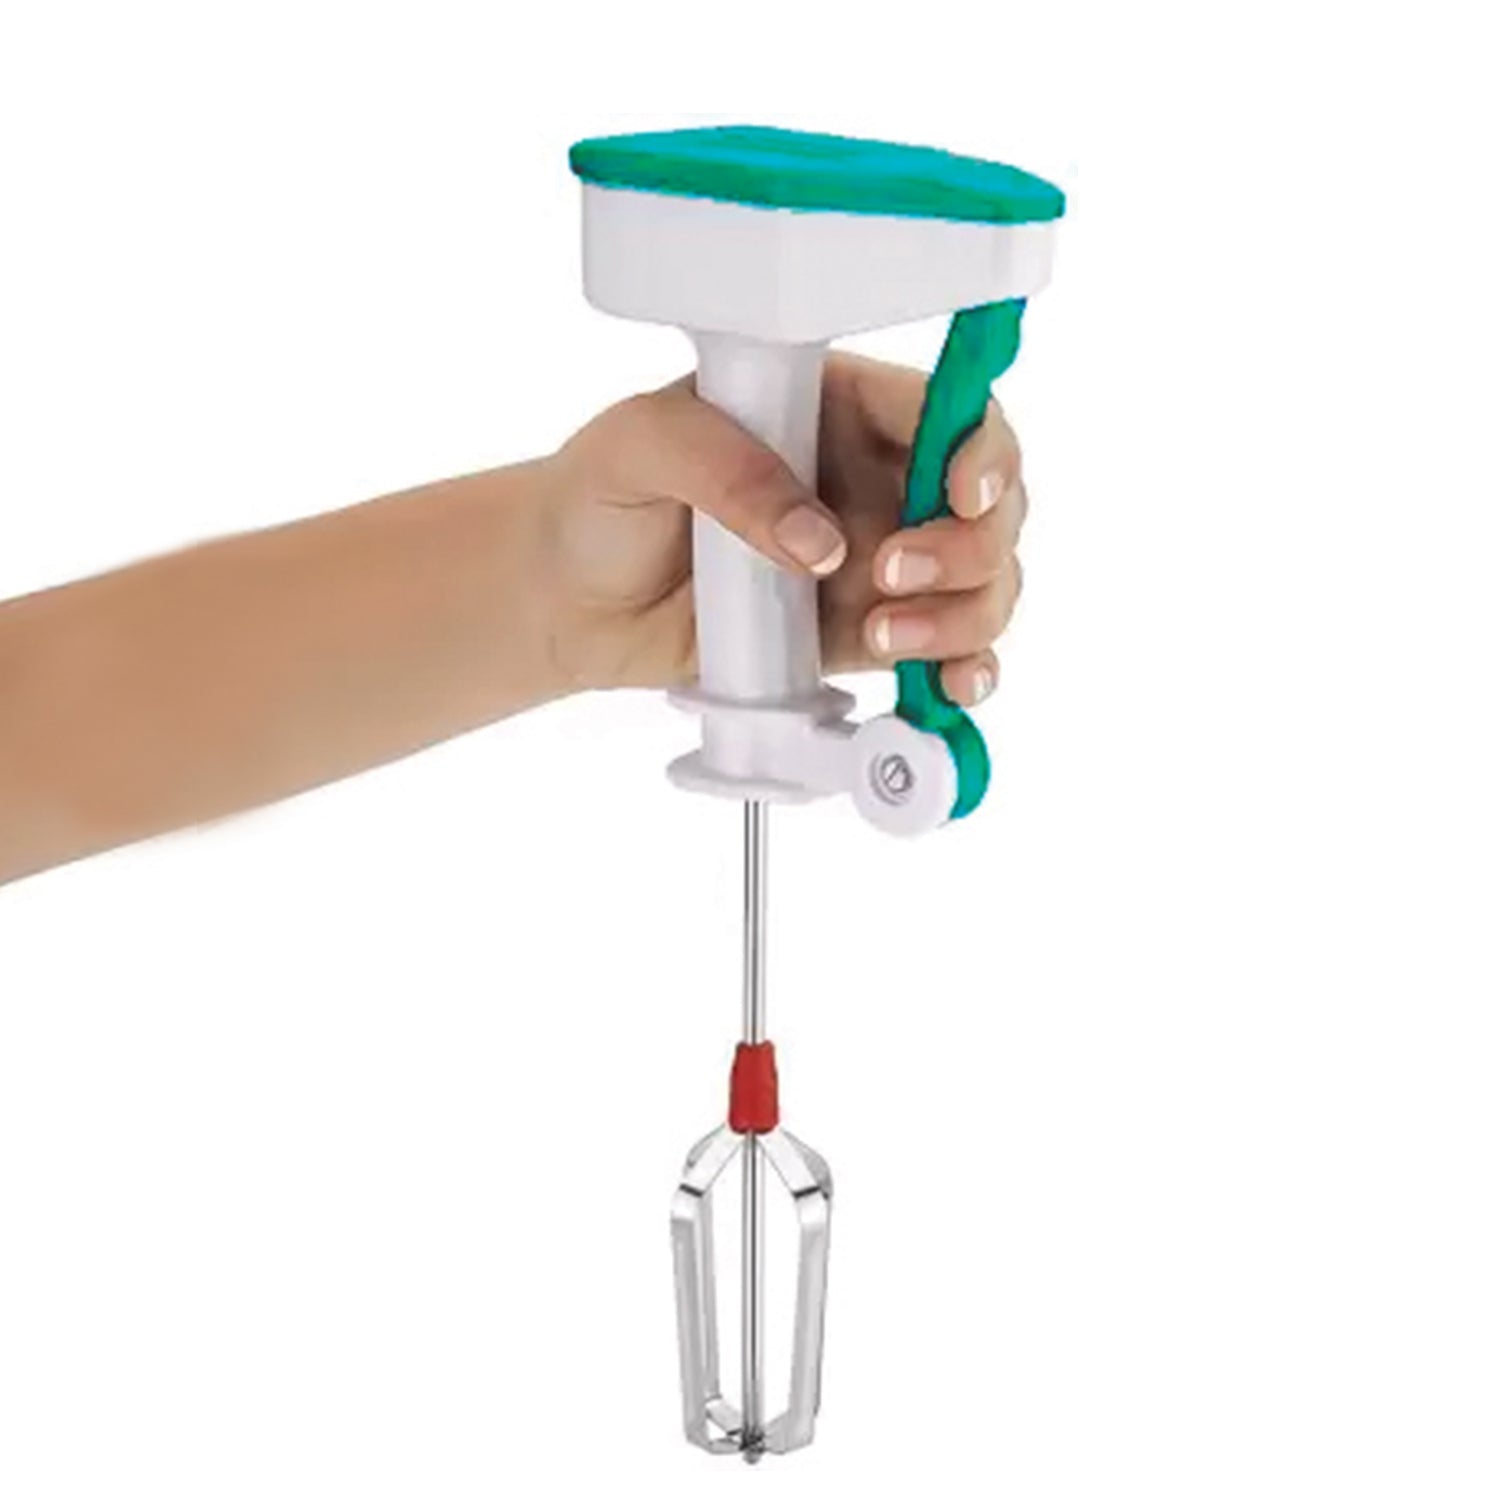 0723 Power-Free Manual Hand Blender With Stainless Steel Blades Dukandaily